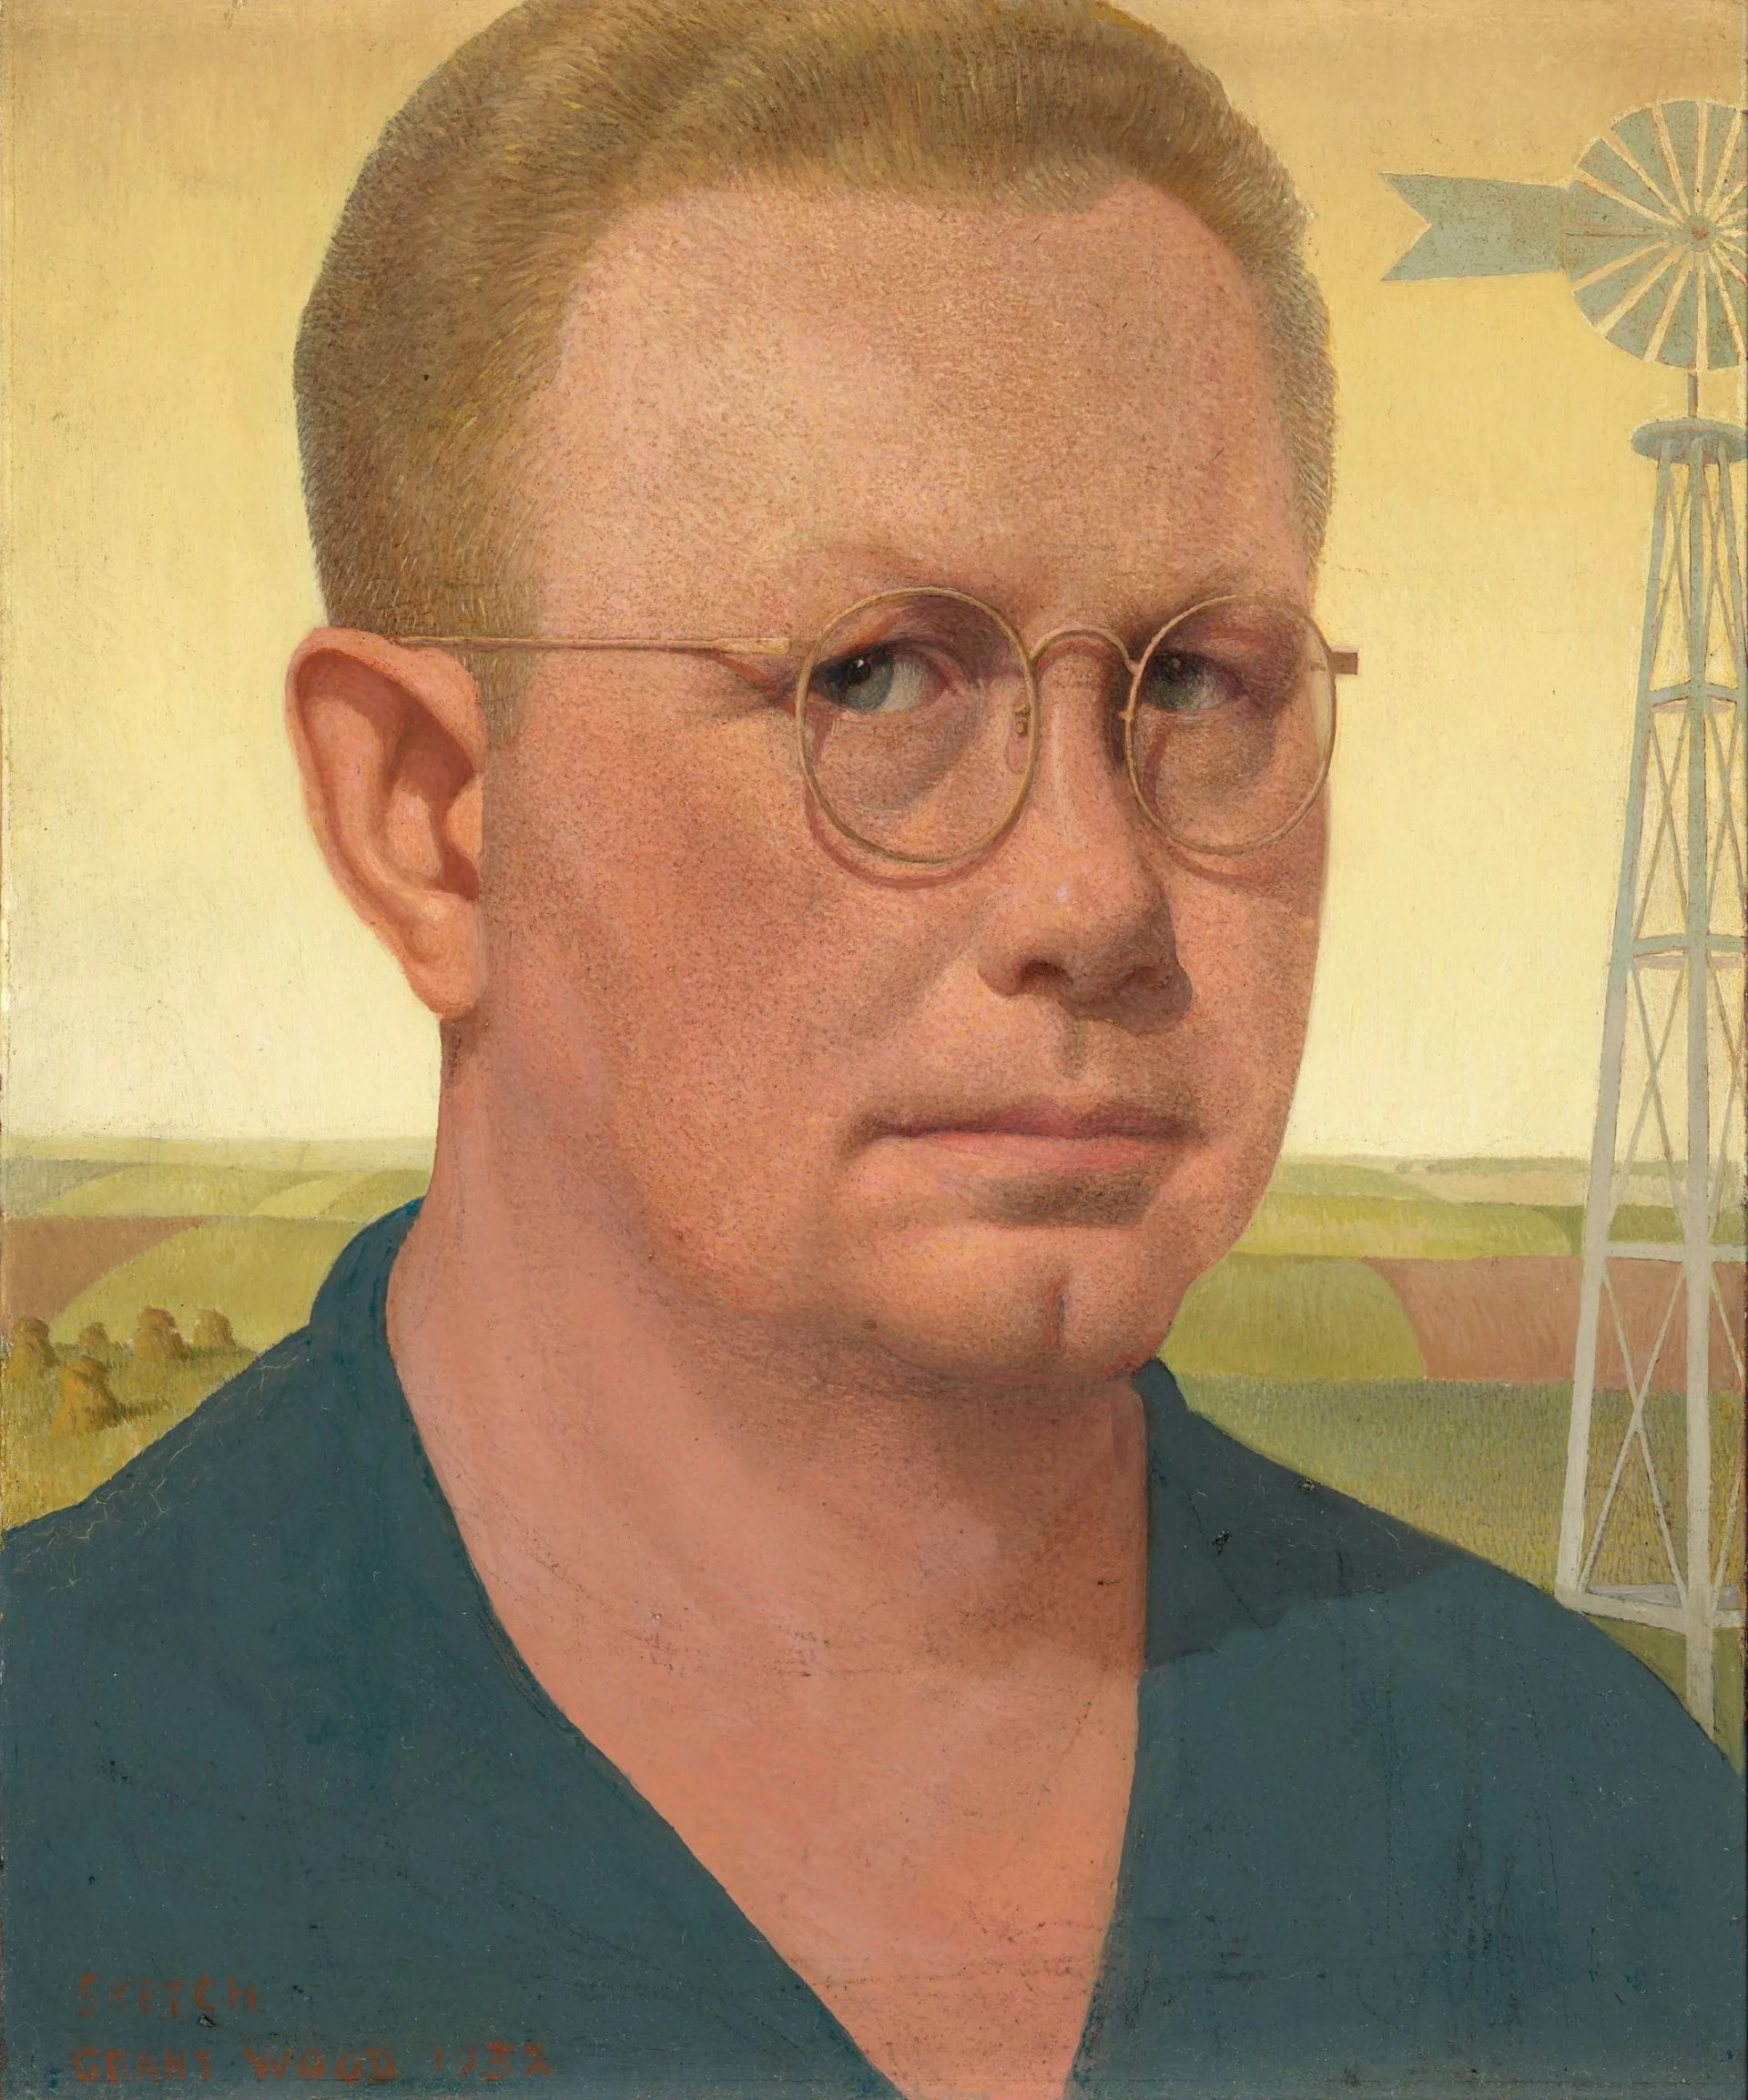 The painting features a close-up of the artist, presenting him from the chest up, his gaze directed towards the viewer. He wears round glasses and a simple shirt, his face showing a reserved, thoughtful expression. Behind him stretches a pastoral landscape, typical of Wood's body of work. The verdant, rolling fields under a clear sky suggest the peaceful tranquility of rural Midwestern America. The contrast between the detailed foreground and the stylized, almost abstract background creates a fascinating juxtaposition between the personal and the universal, the individual and the environment.